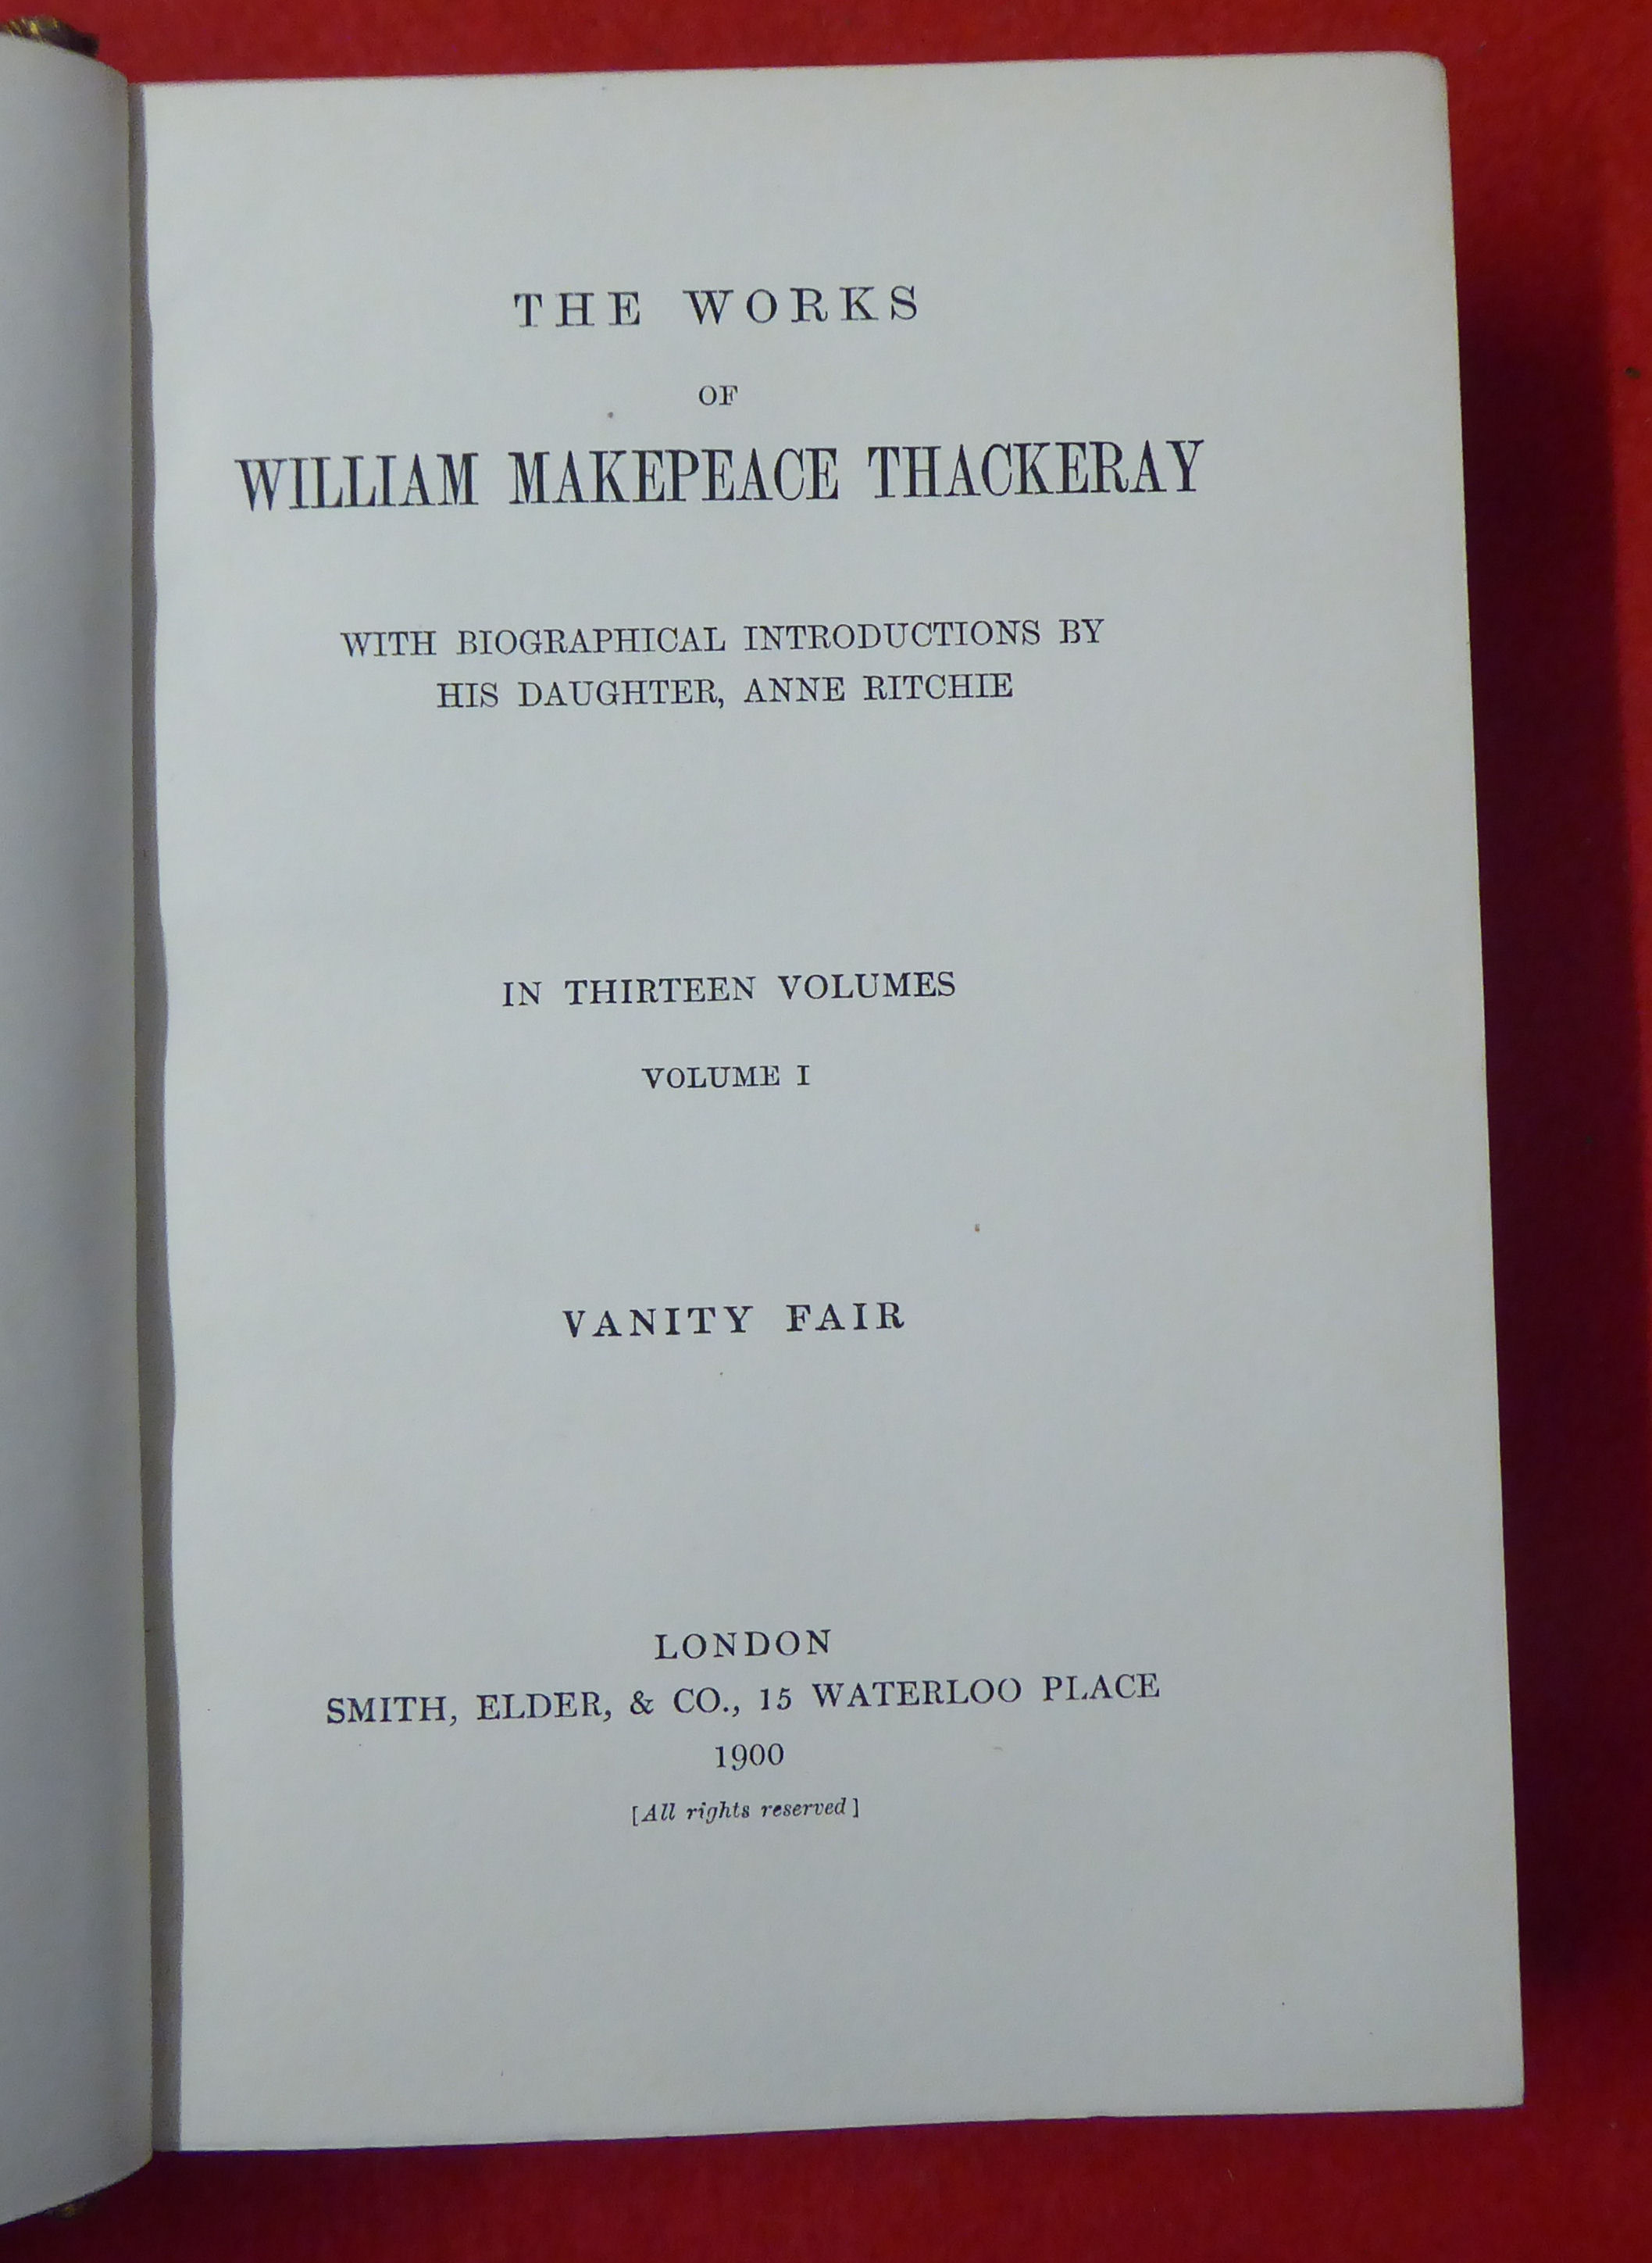 Books: 'The Works of William Makepeace Thackeray'  dated 1900, in thirteen volumes  (volume seven - Image 3 of 16